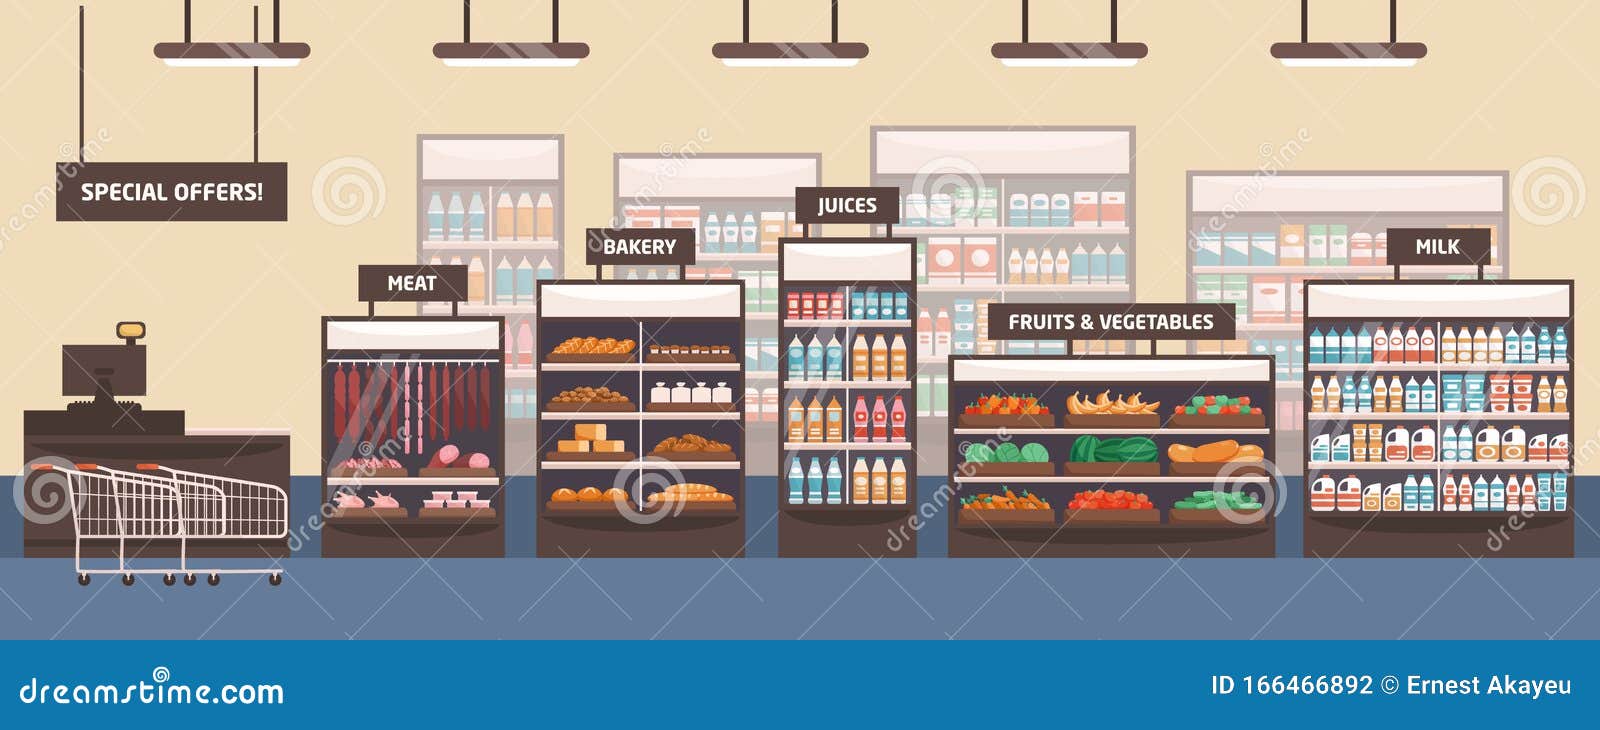 Supermarket Interior Flat Vector Illustration. Grocery Store, Shelves with  Food Products Stock Vector - Illustration of choice, cartoon: 166466892